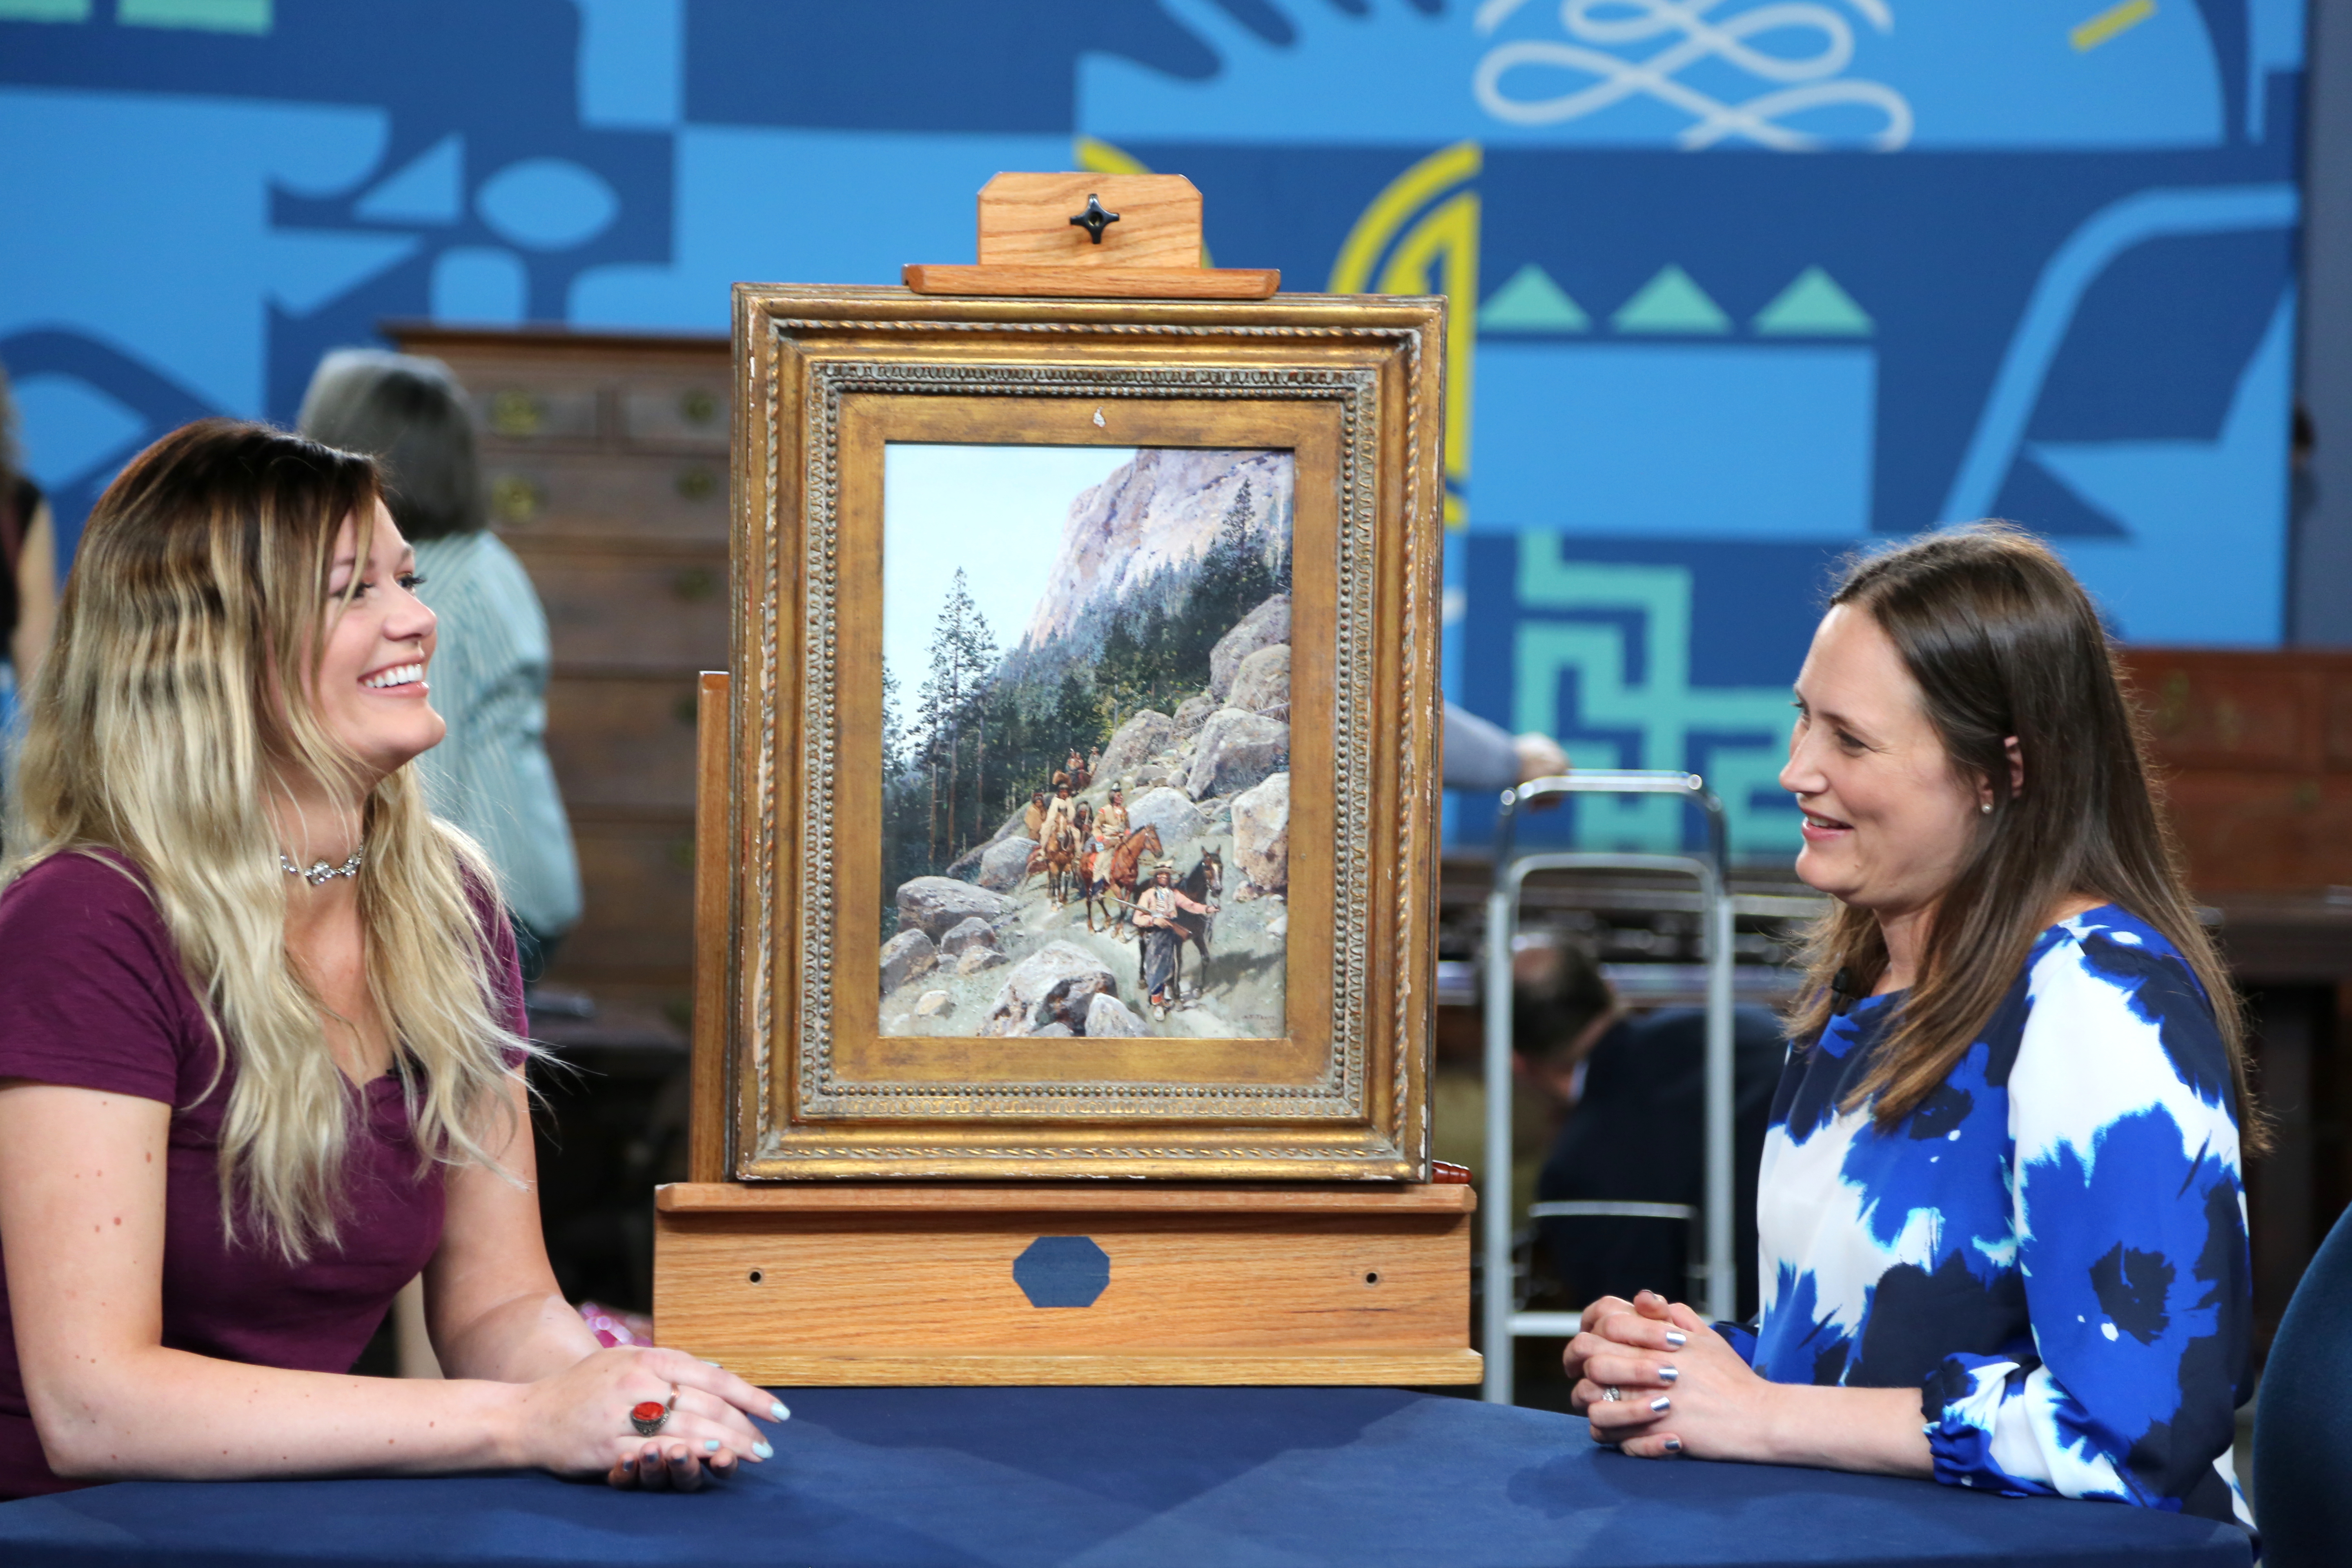 Two women on either side of a painting image